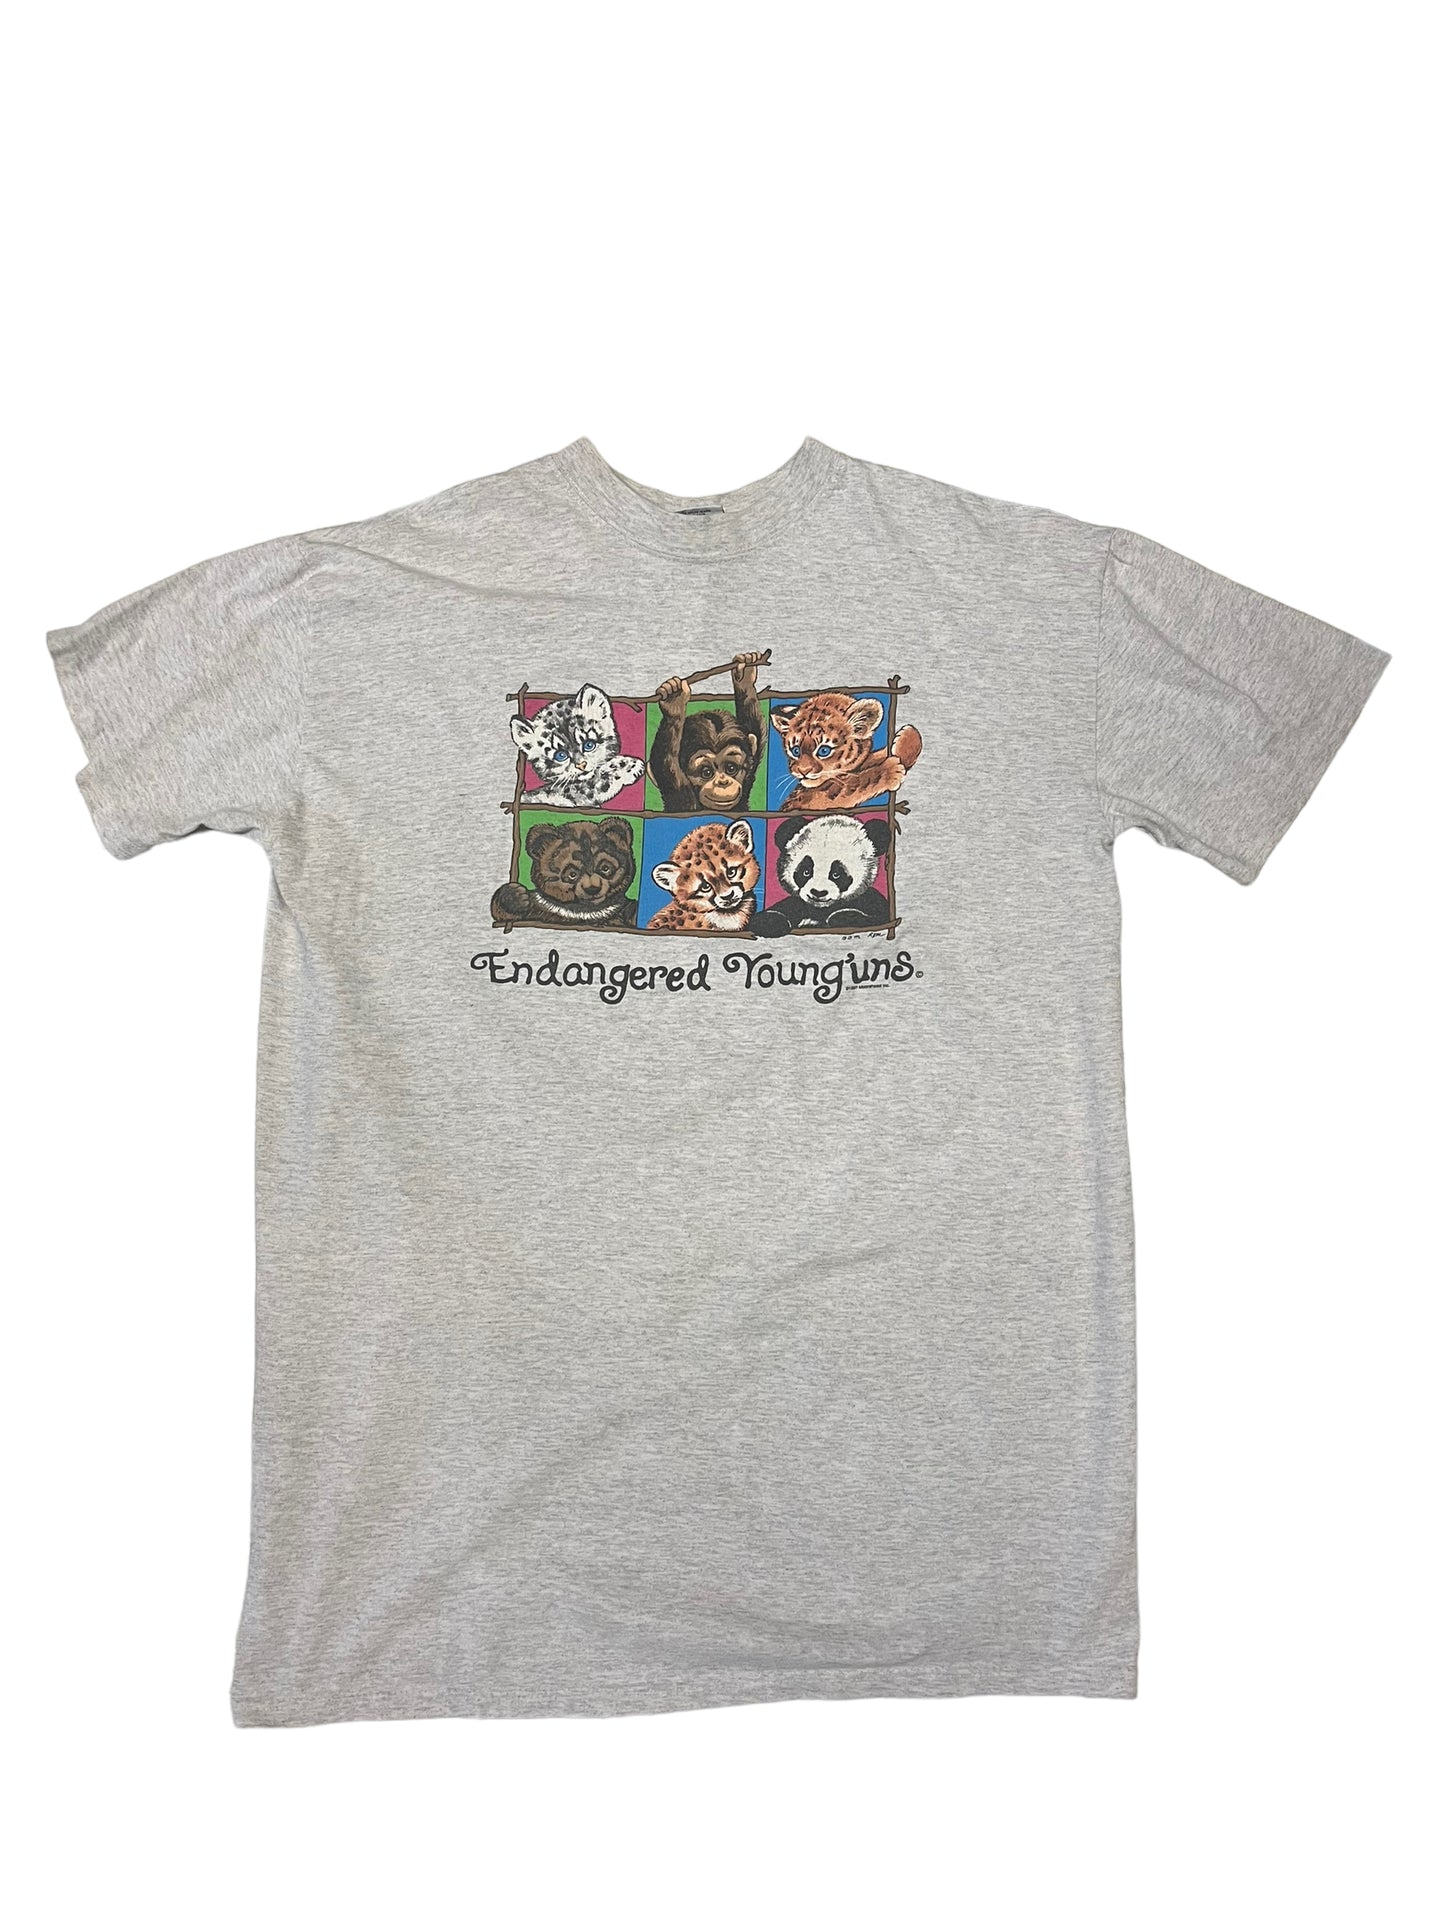 (XXL) 1997 Endangered Youngins Tee